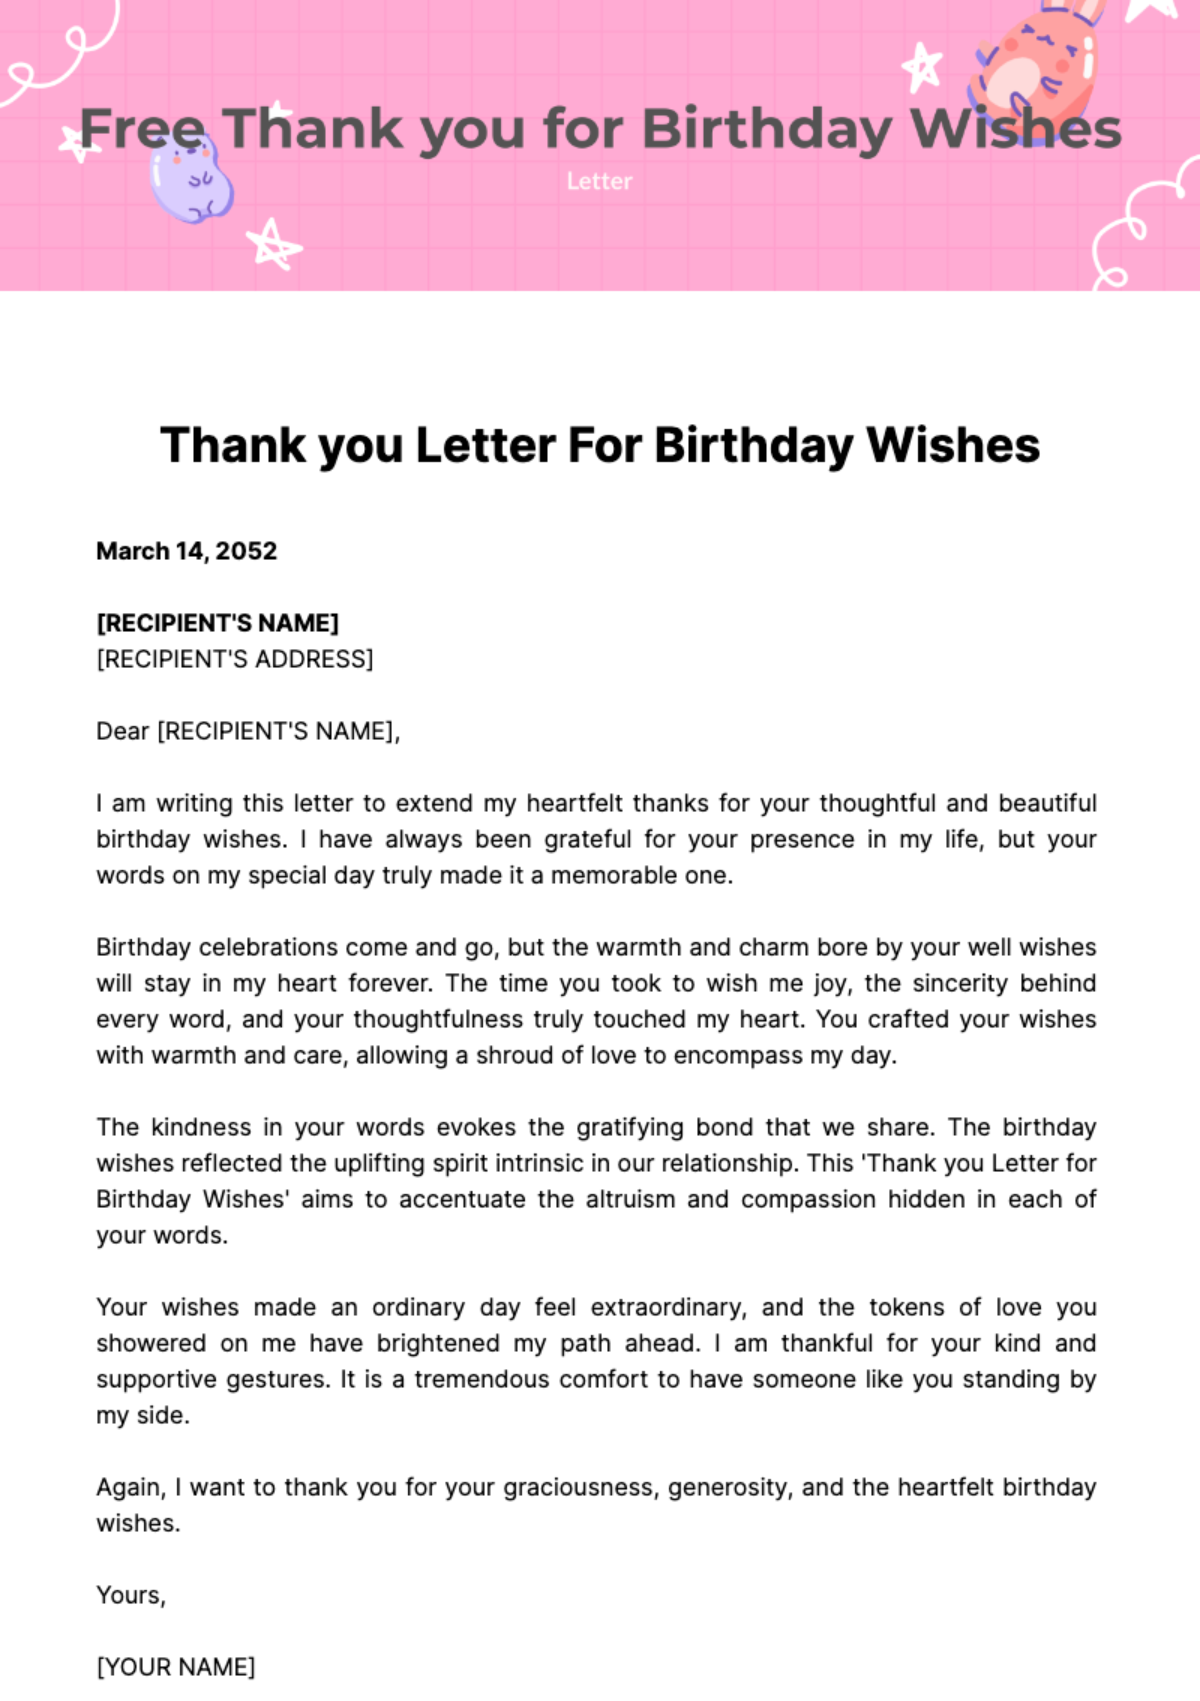 Free Thank you Letter for Birthday Wishes Template